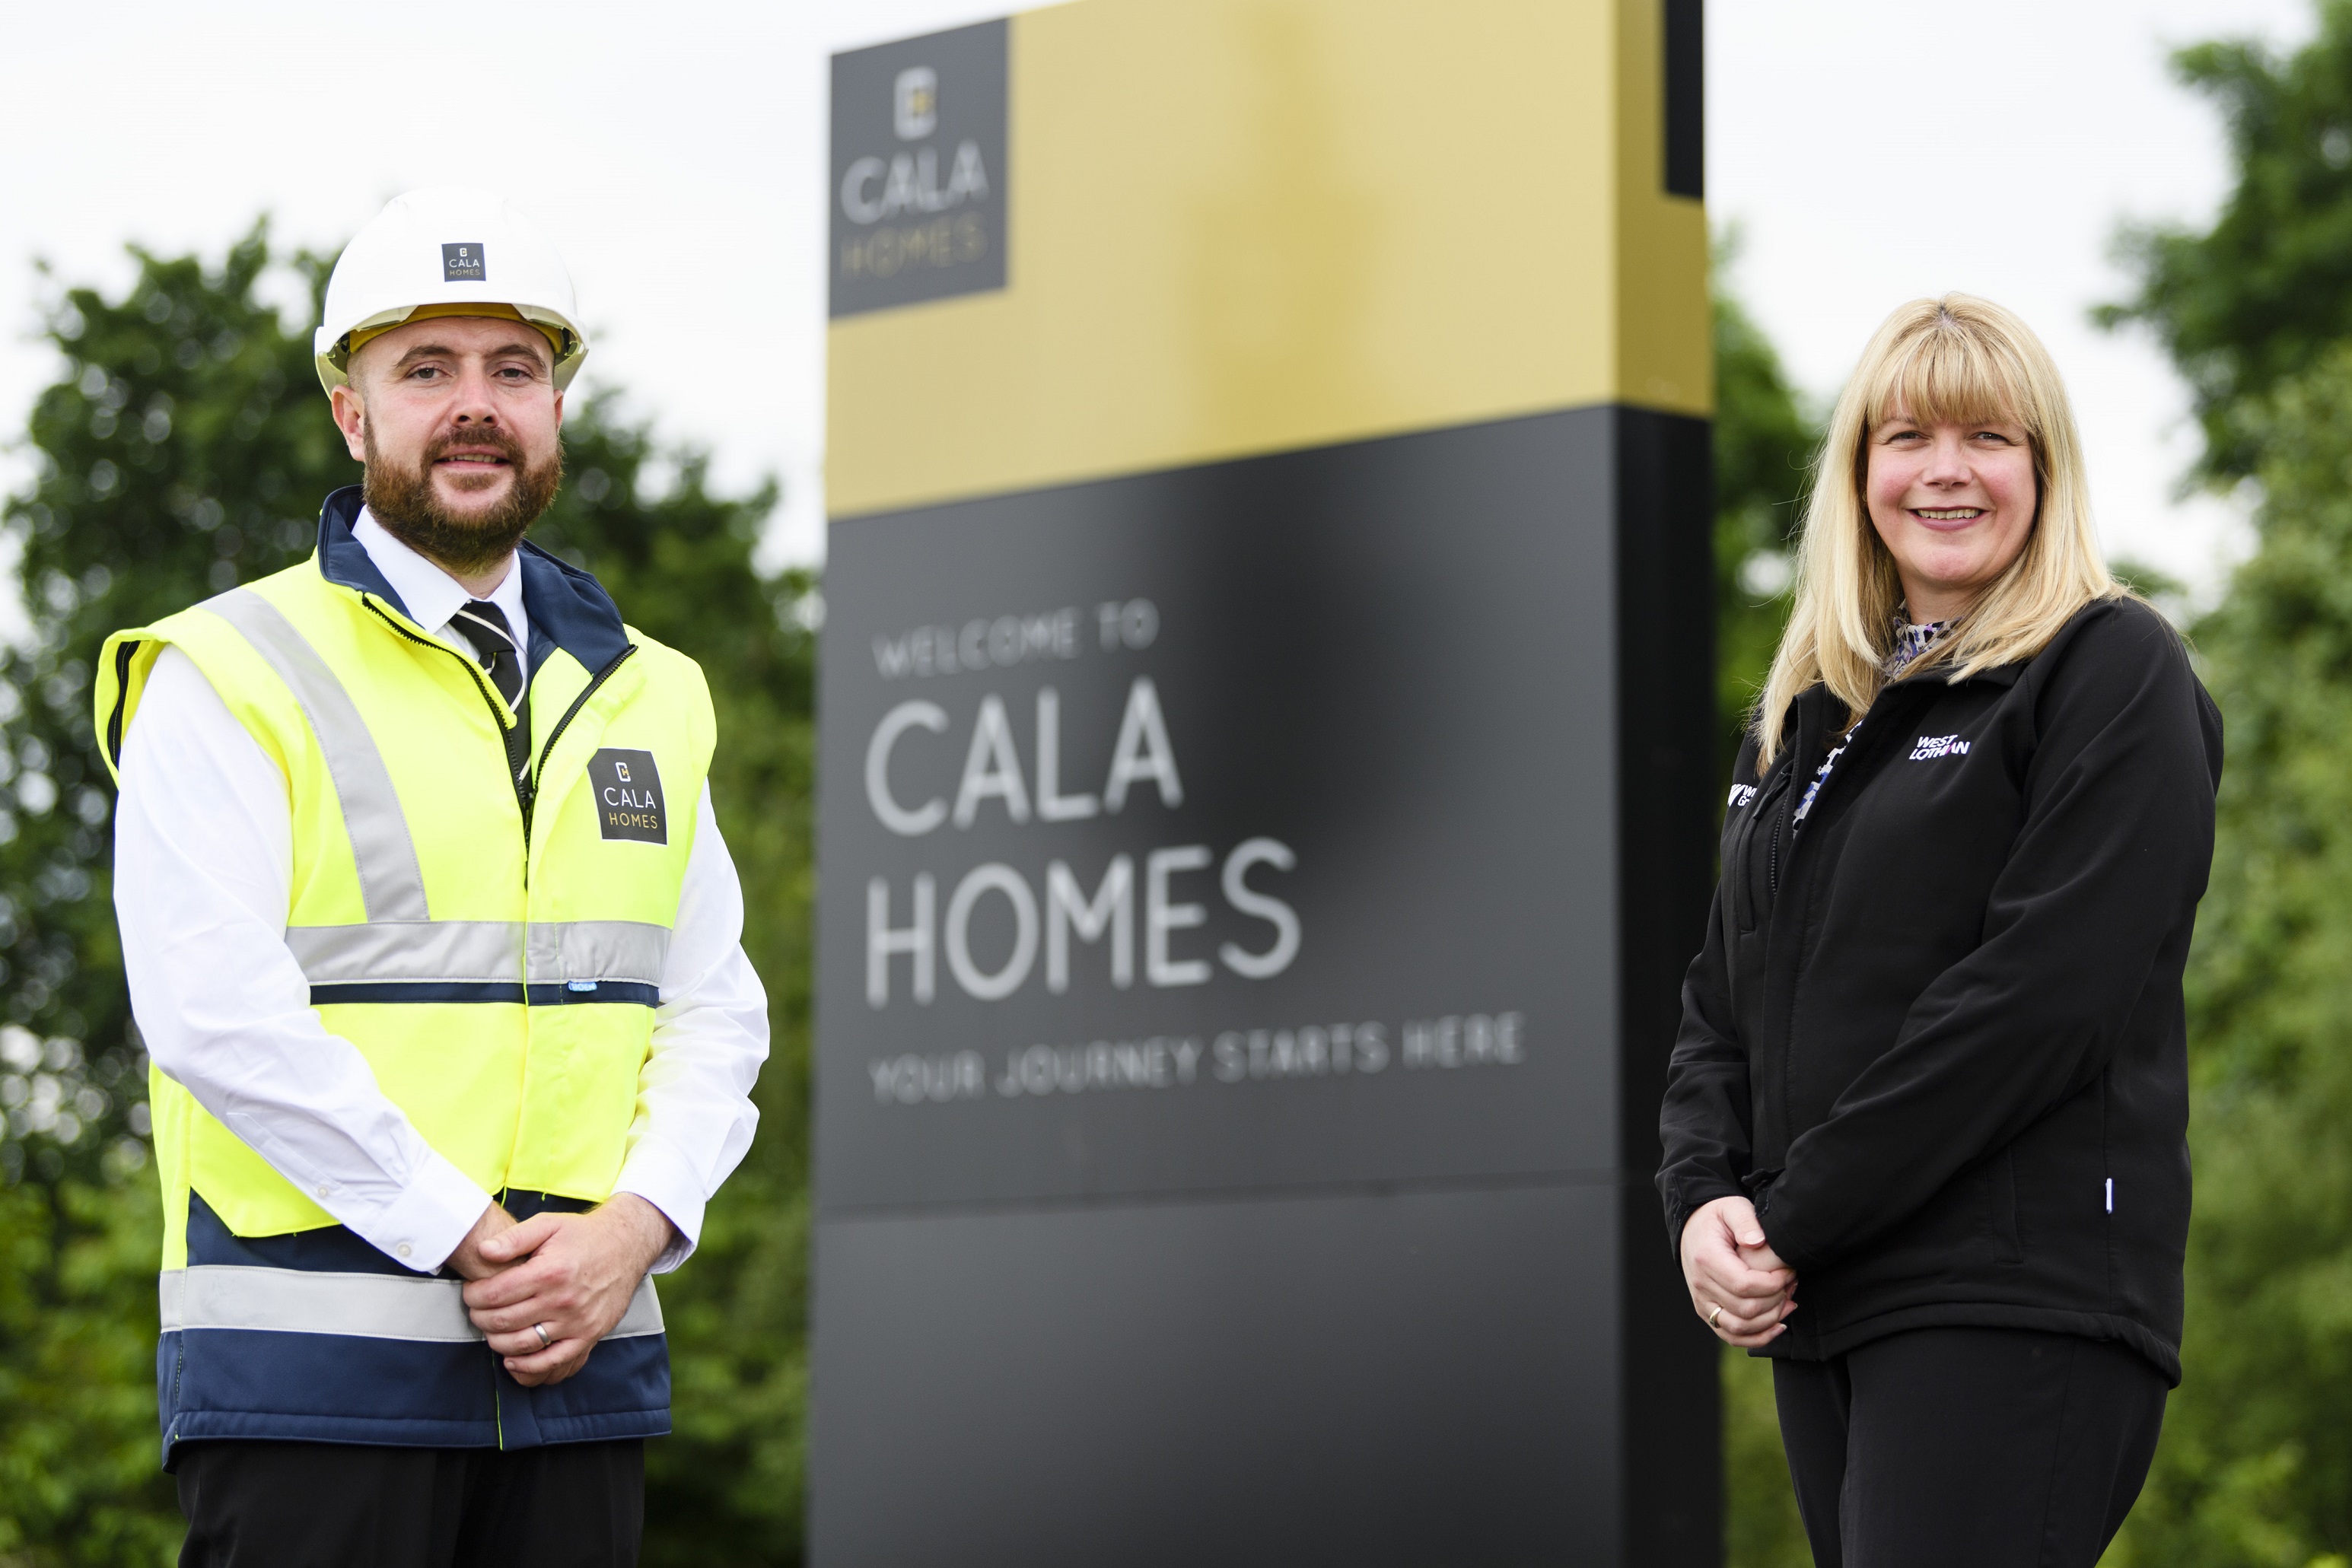 Green light for 14 new affordable homes in Linlithgow